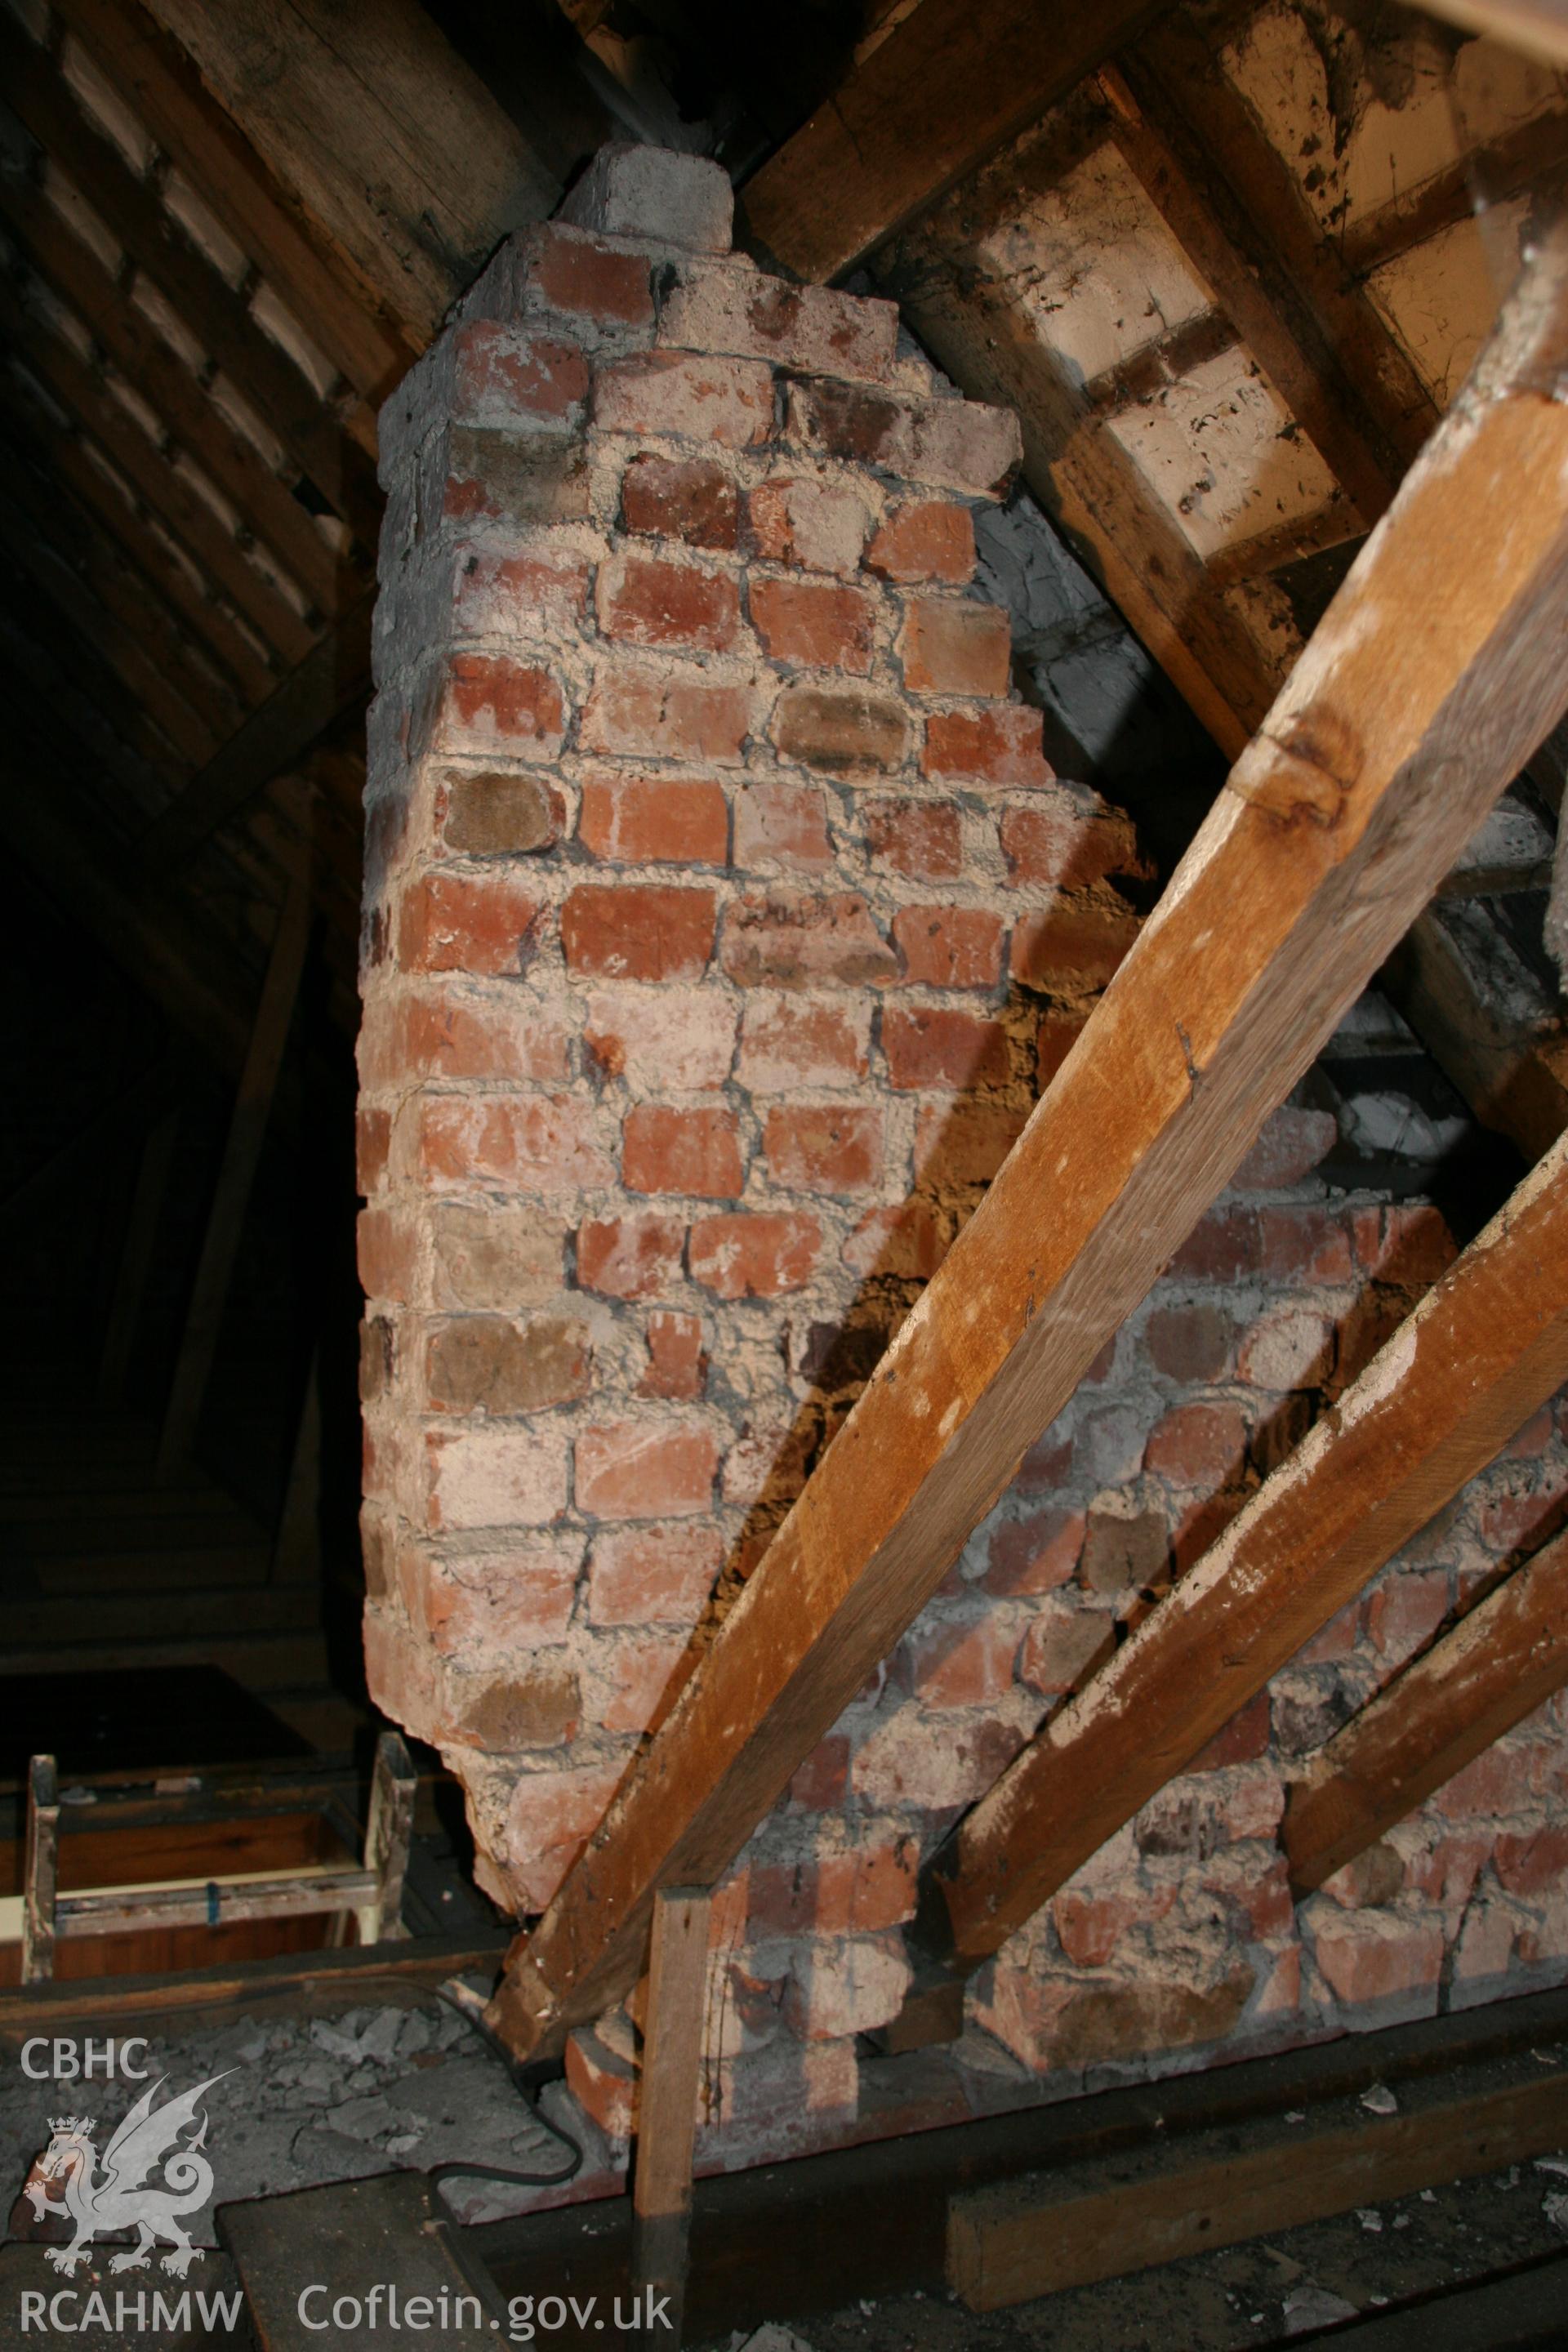 Photograph showing interior view of wooden beams, floor boards & brick wall in loft of former Llawrybettws Welsh Calvinistic Methodist chapel, Glanyrafon, Corwen. Taken by Tim Allen on 27/02/2019 to meet a condition attached to planning application.